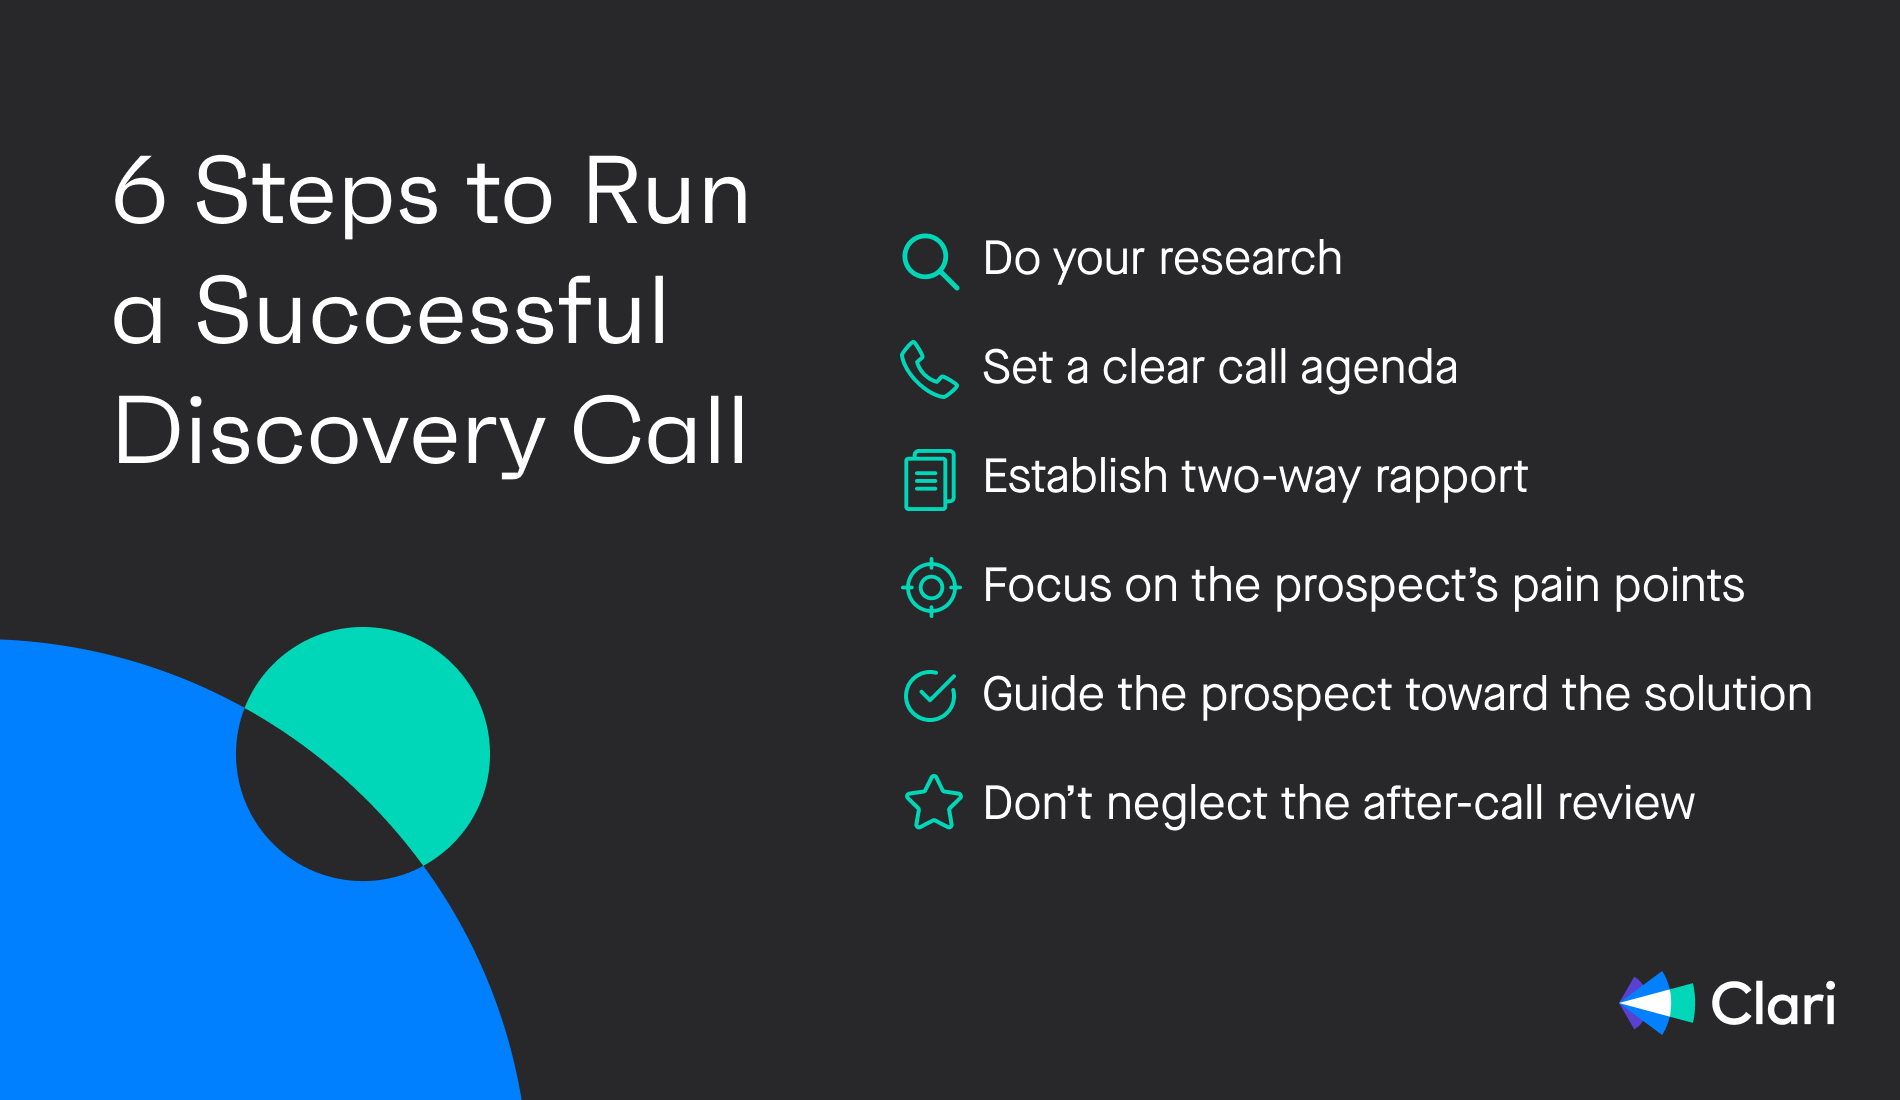 A graphic describing the 6 steps to run a successful discovery call.